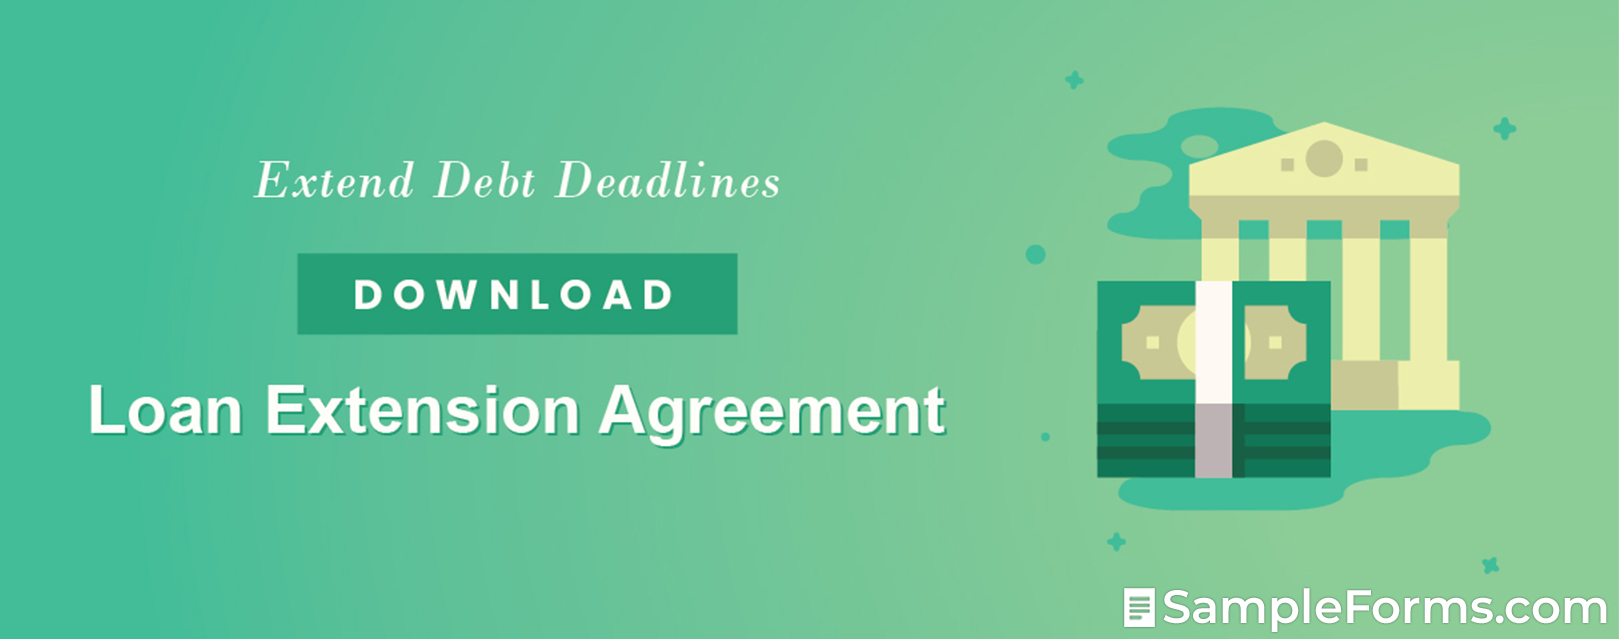 Loan Extension Agreement